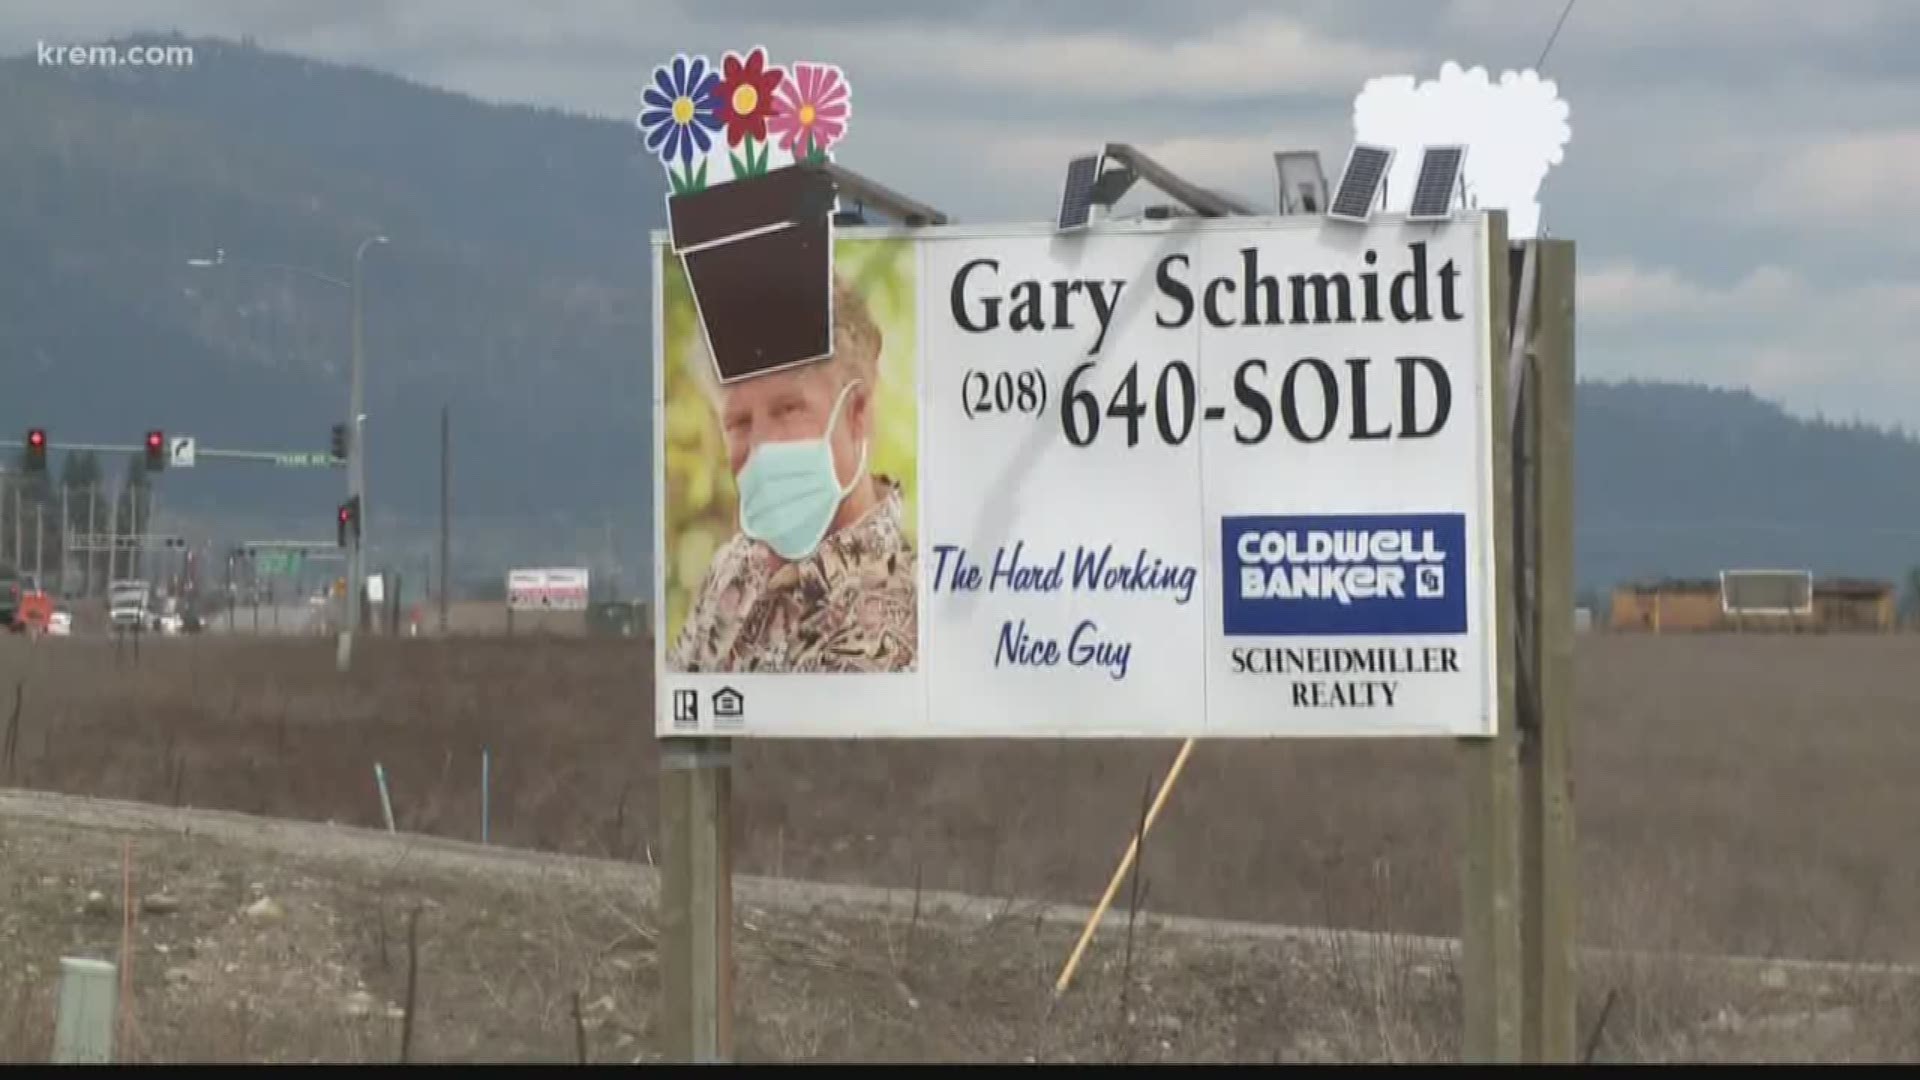 Gary Schmidt has become known to drivers along Highway 41 for his photo featuring a unique hat or object atop his head to mark holidays and seasons.